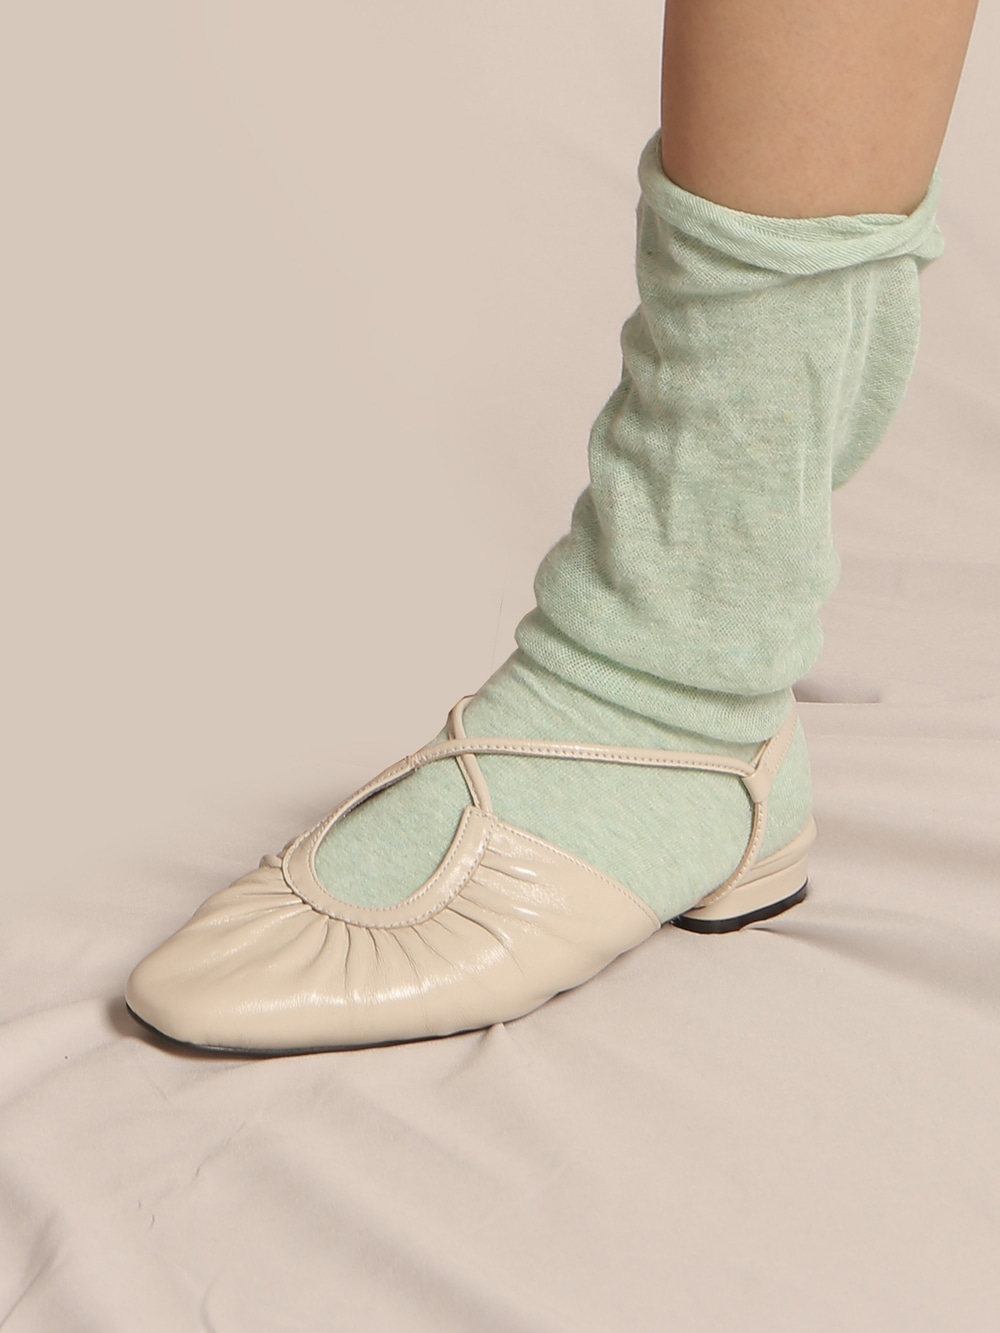 French ballet shoes glossy  Ivory